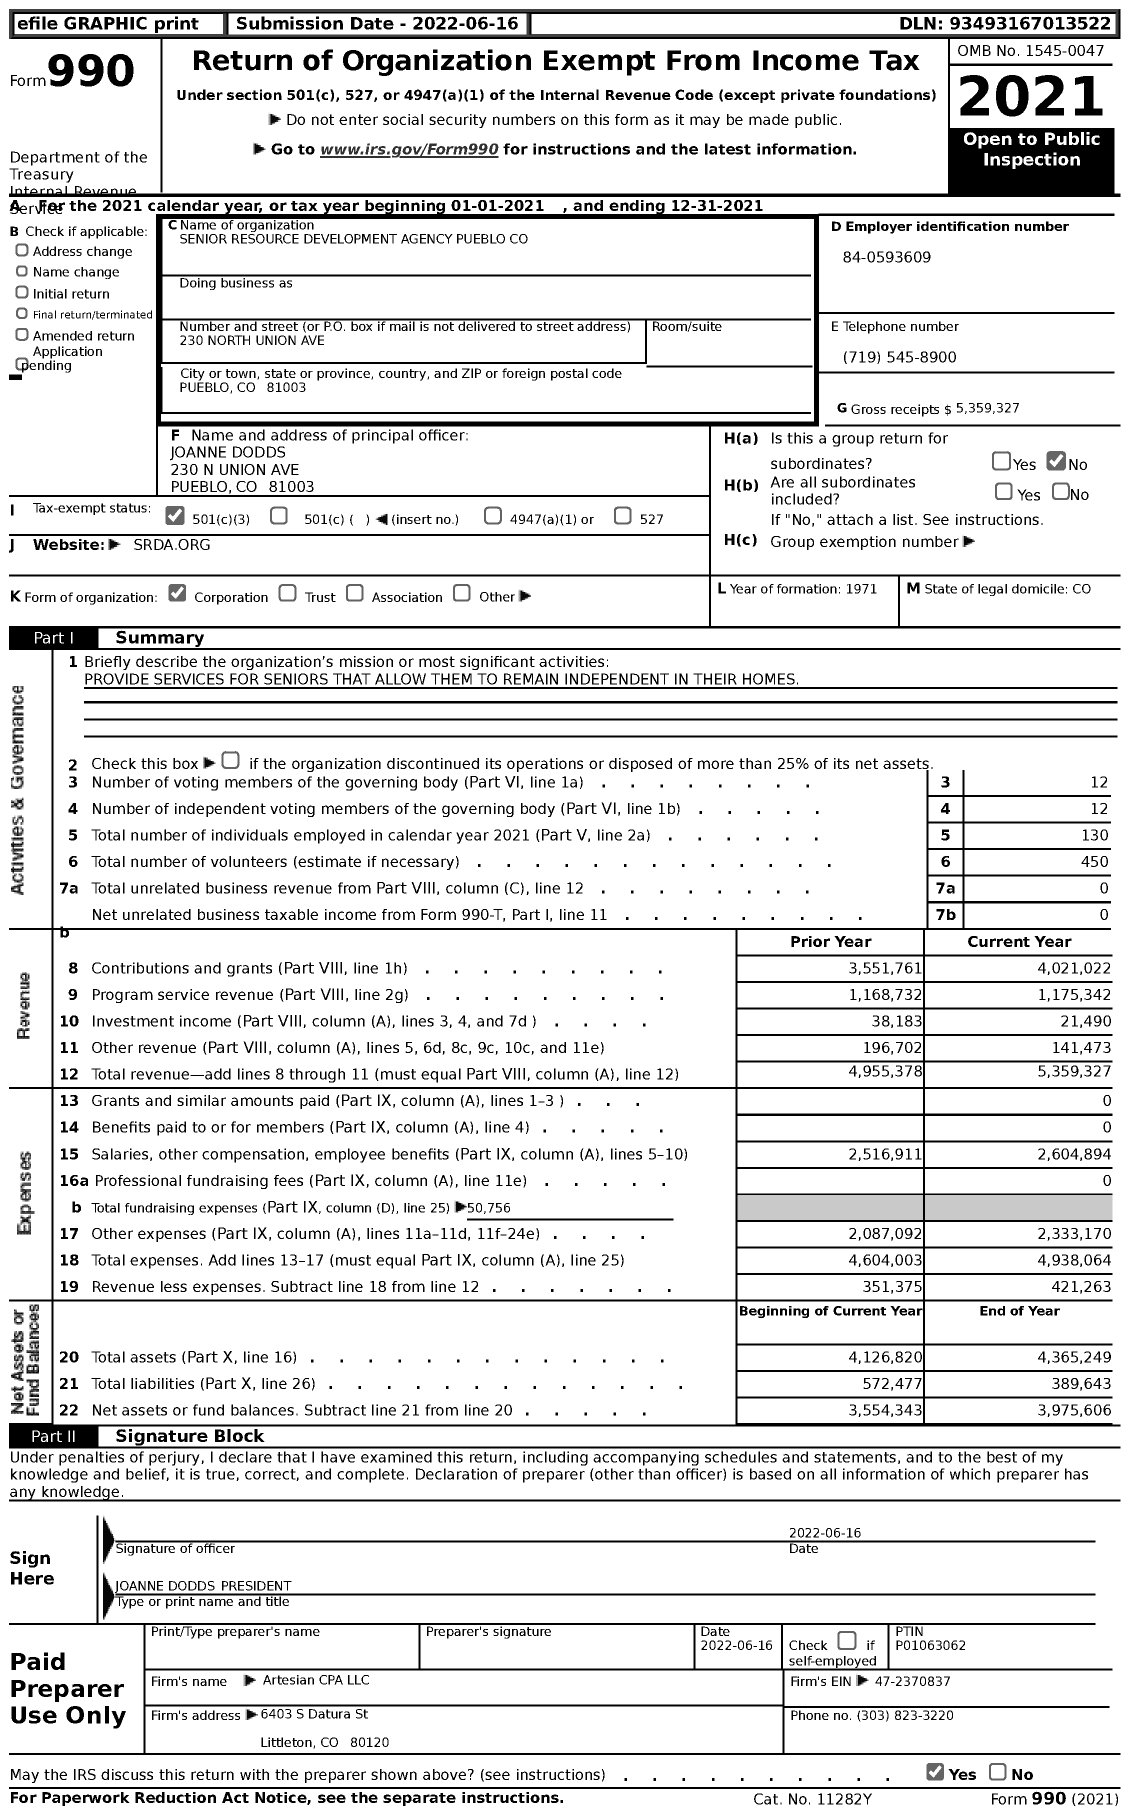 Image of first page of 2021 Form 990 for Senior Resource Development Agency Pueblo